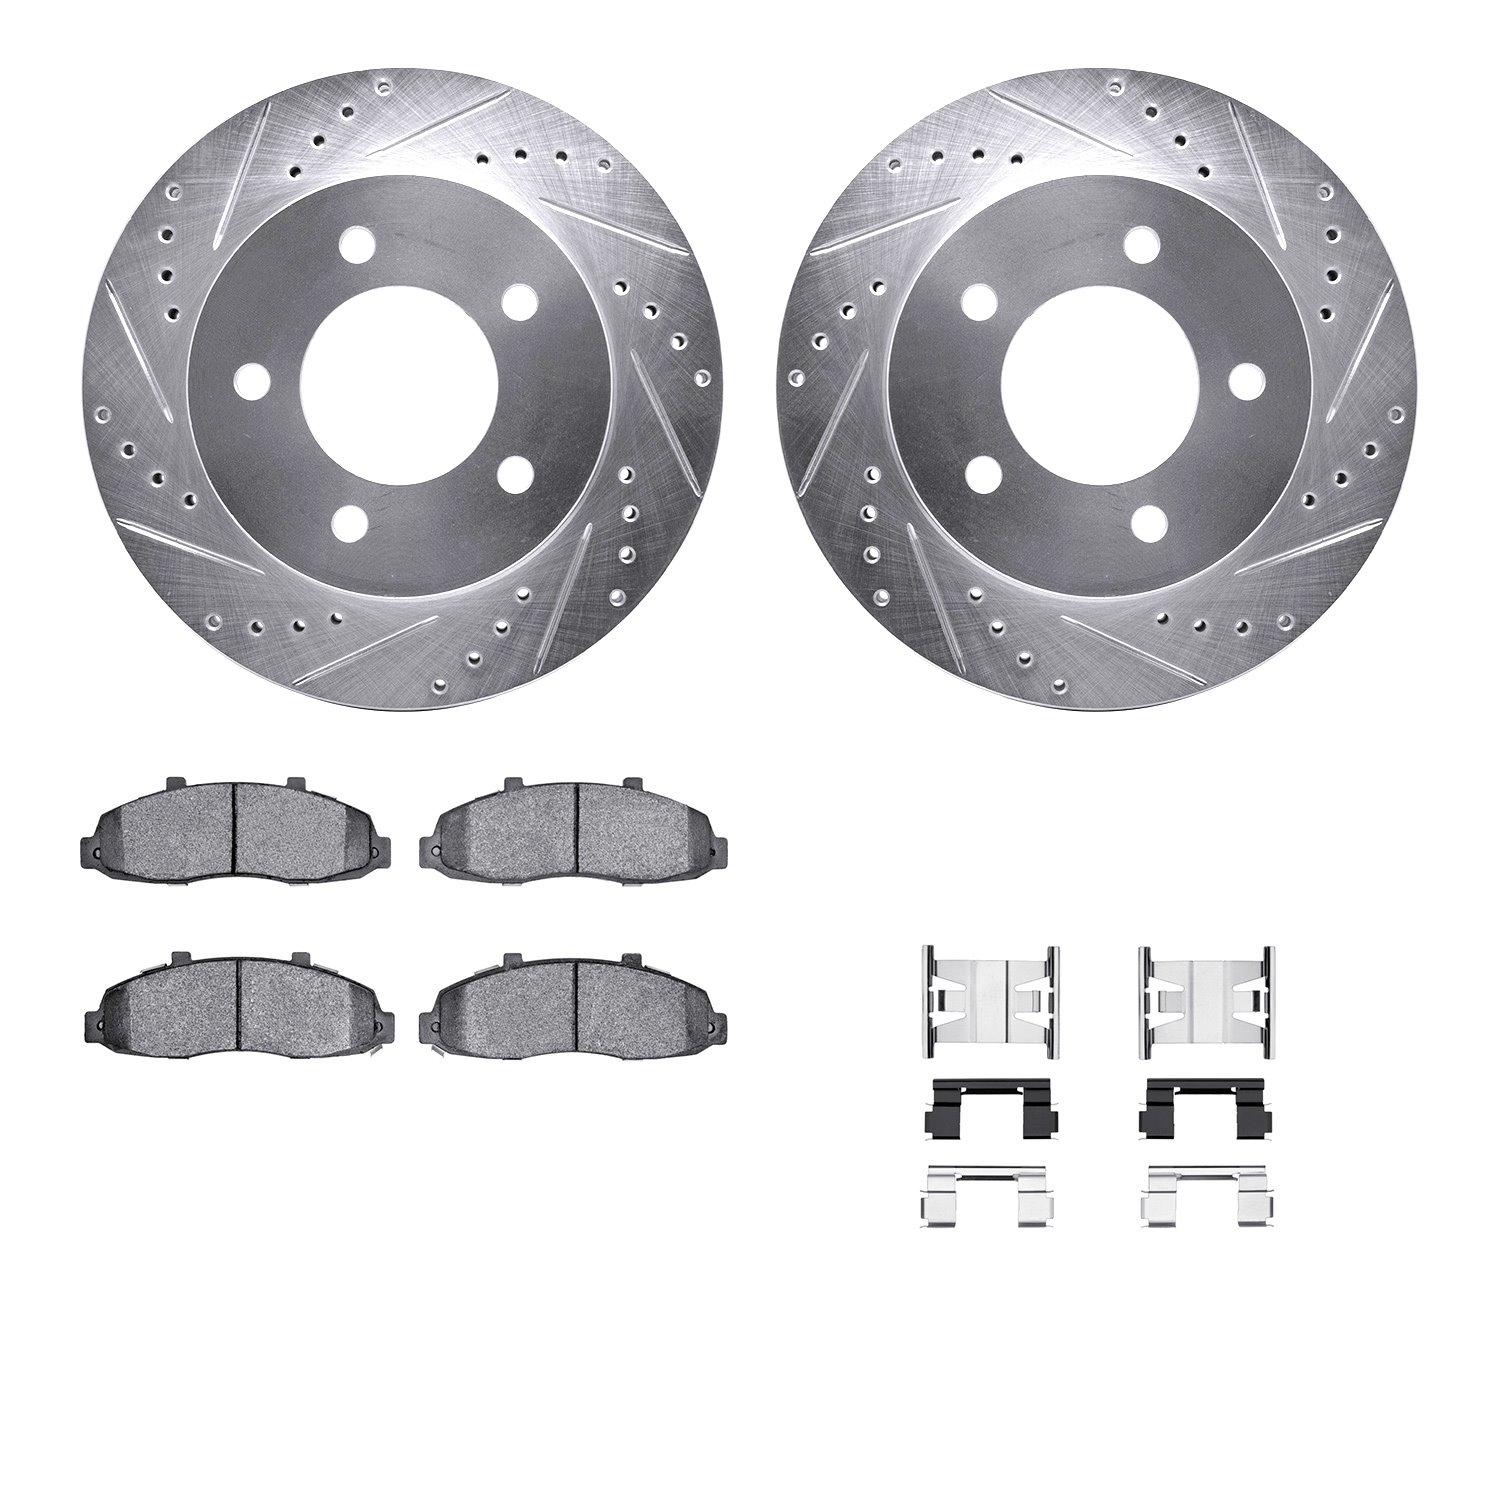 7212-99134 Drilled/Slotted Rotors w/Heavy-Duty Brake Pads Kit & Hardware [Silver], 1997-2004 Ford/Lincoln/Mercury/Mazda, Positio